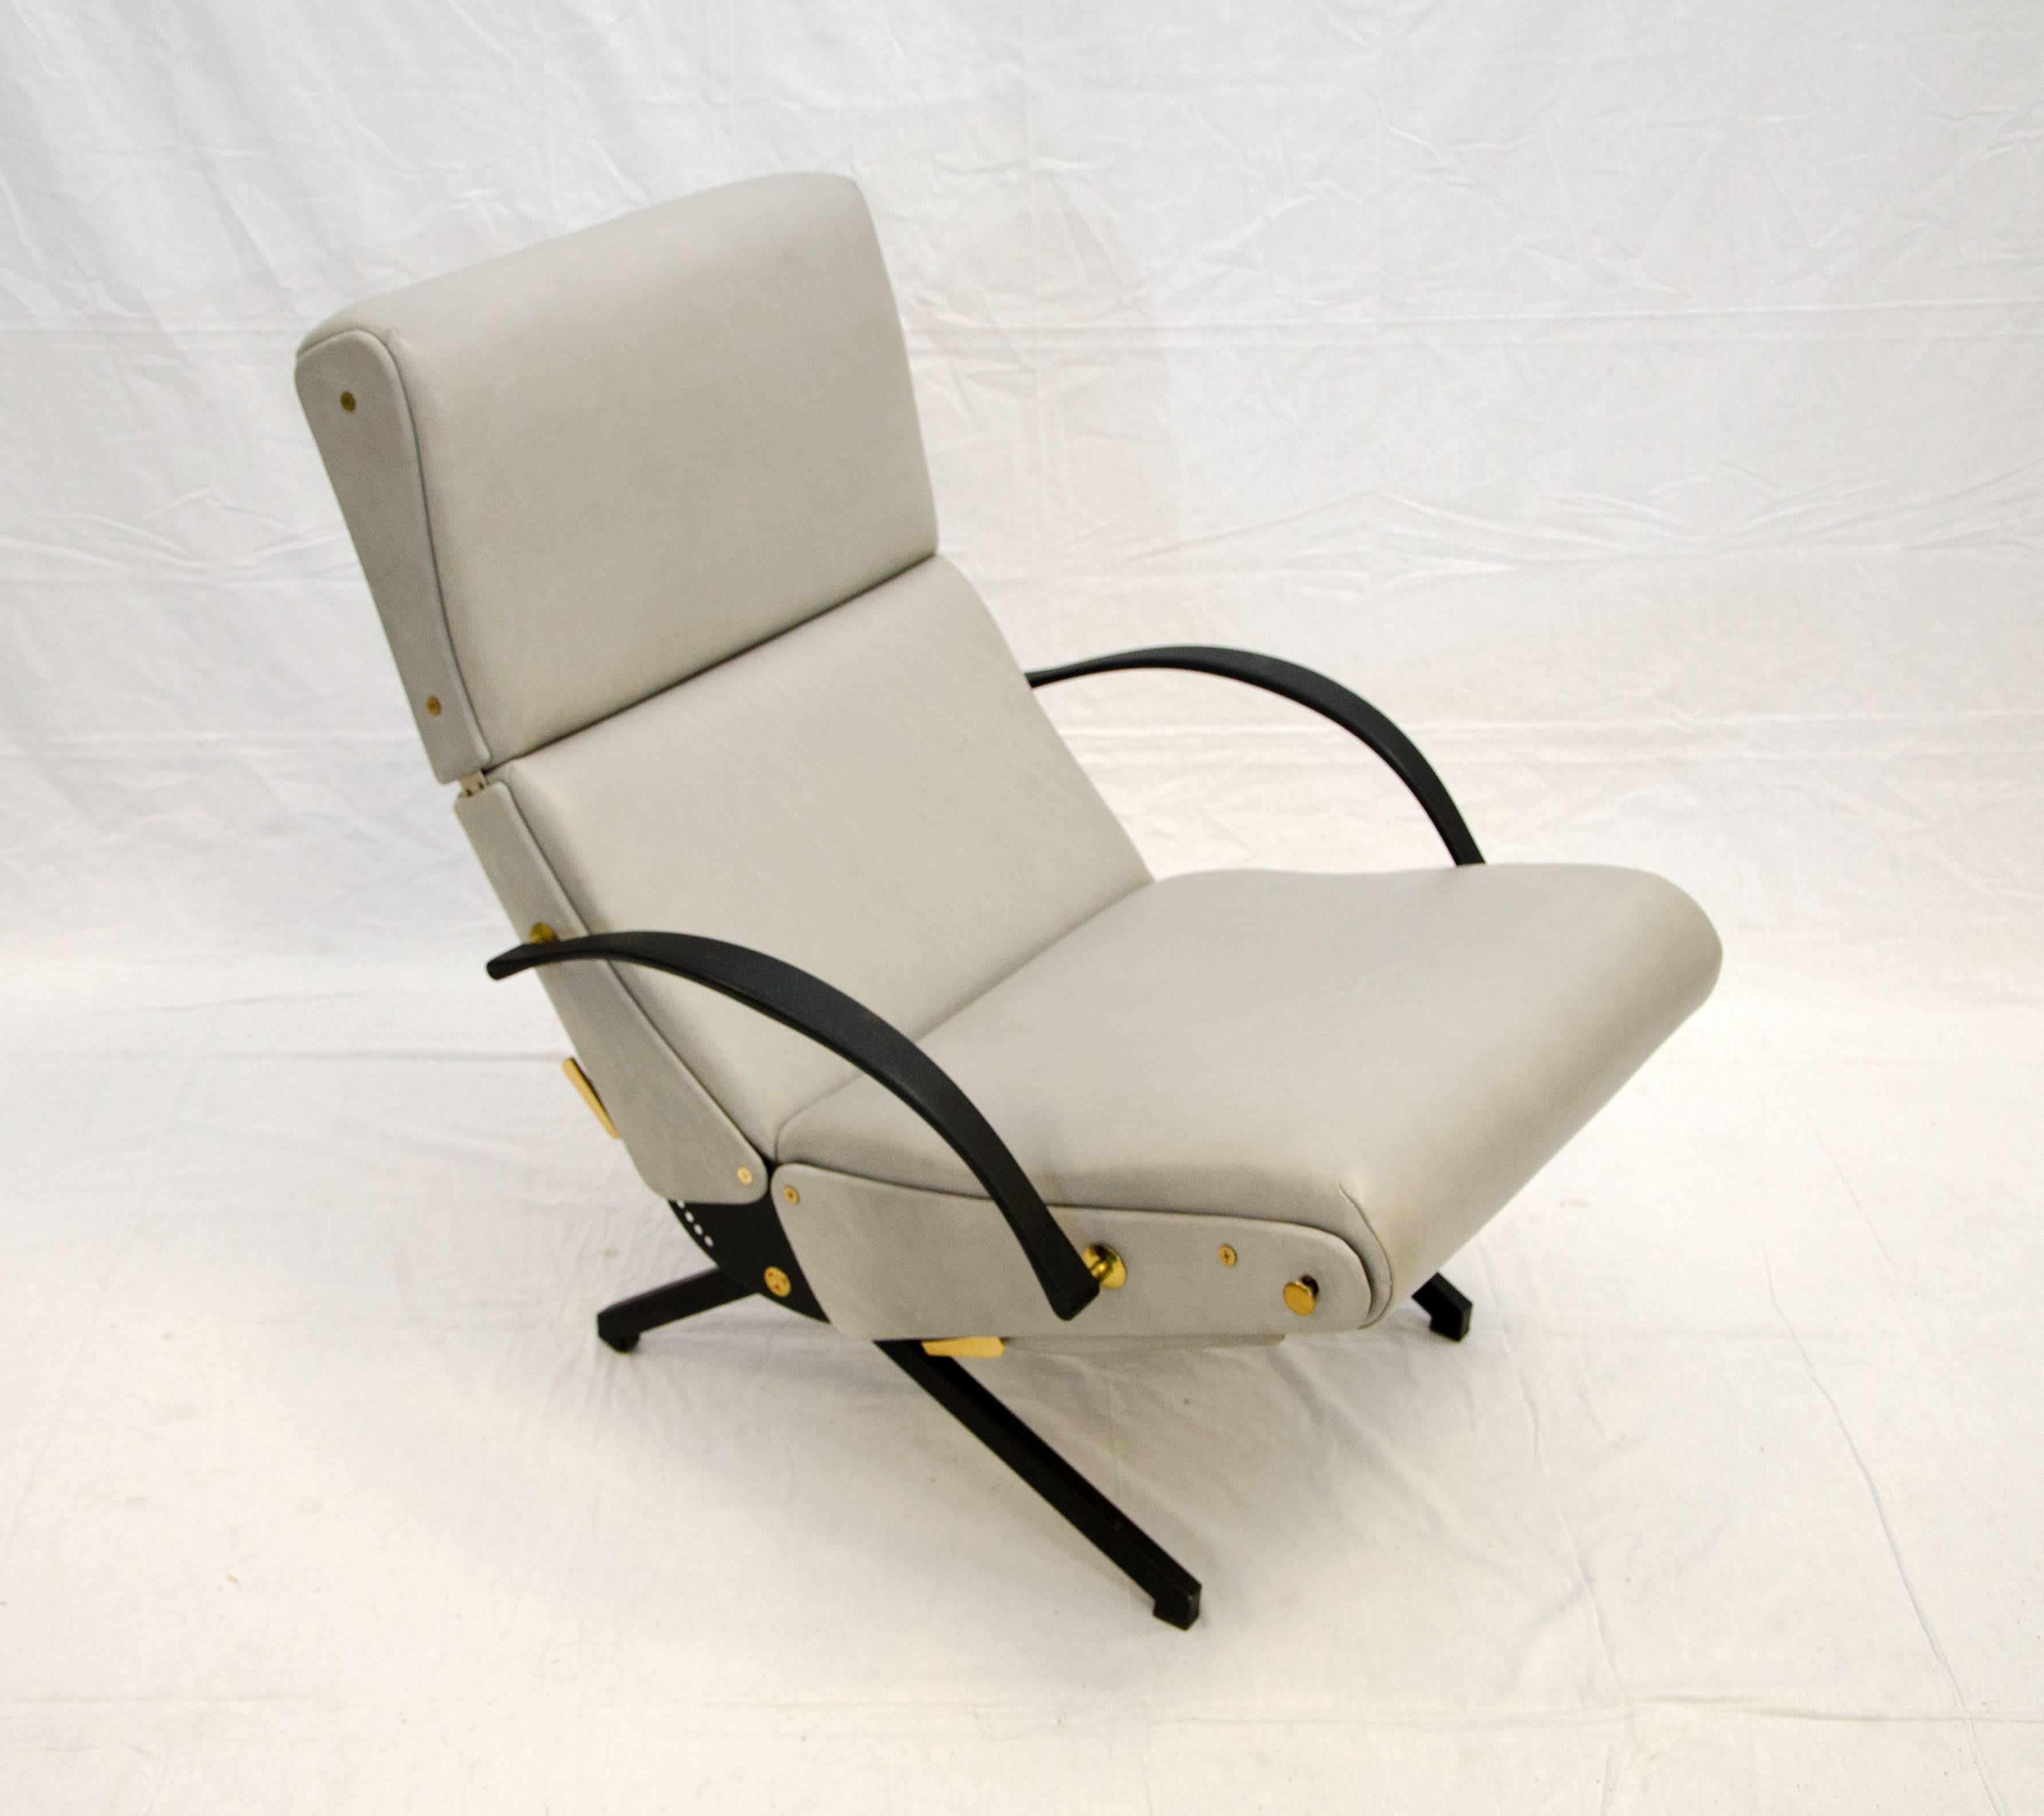 This iconic P40 lounge chair was designed by Osvaldo Borsani and manufactured by Tecno of Milan, Italy. The back, seat, headrest and footrest are each separately adjustable. This chair has been reupholstered with gray leather. The brass levers and